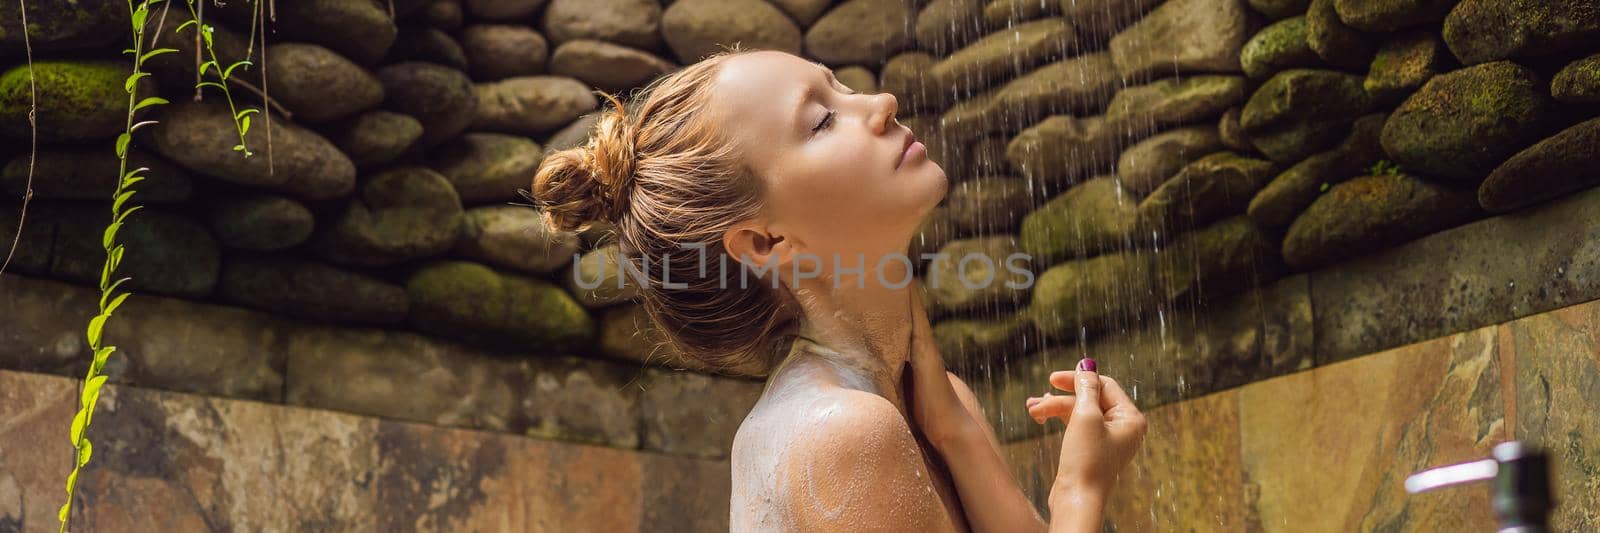 Back view of beautiful naked young woman taking shower in bathroom BANNER, LONG FORMAT by galitskaya